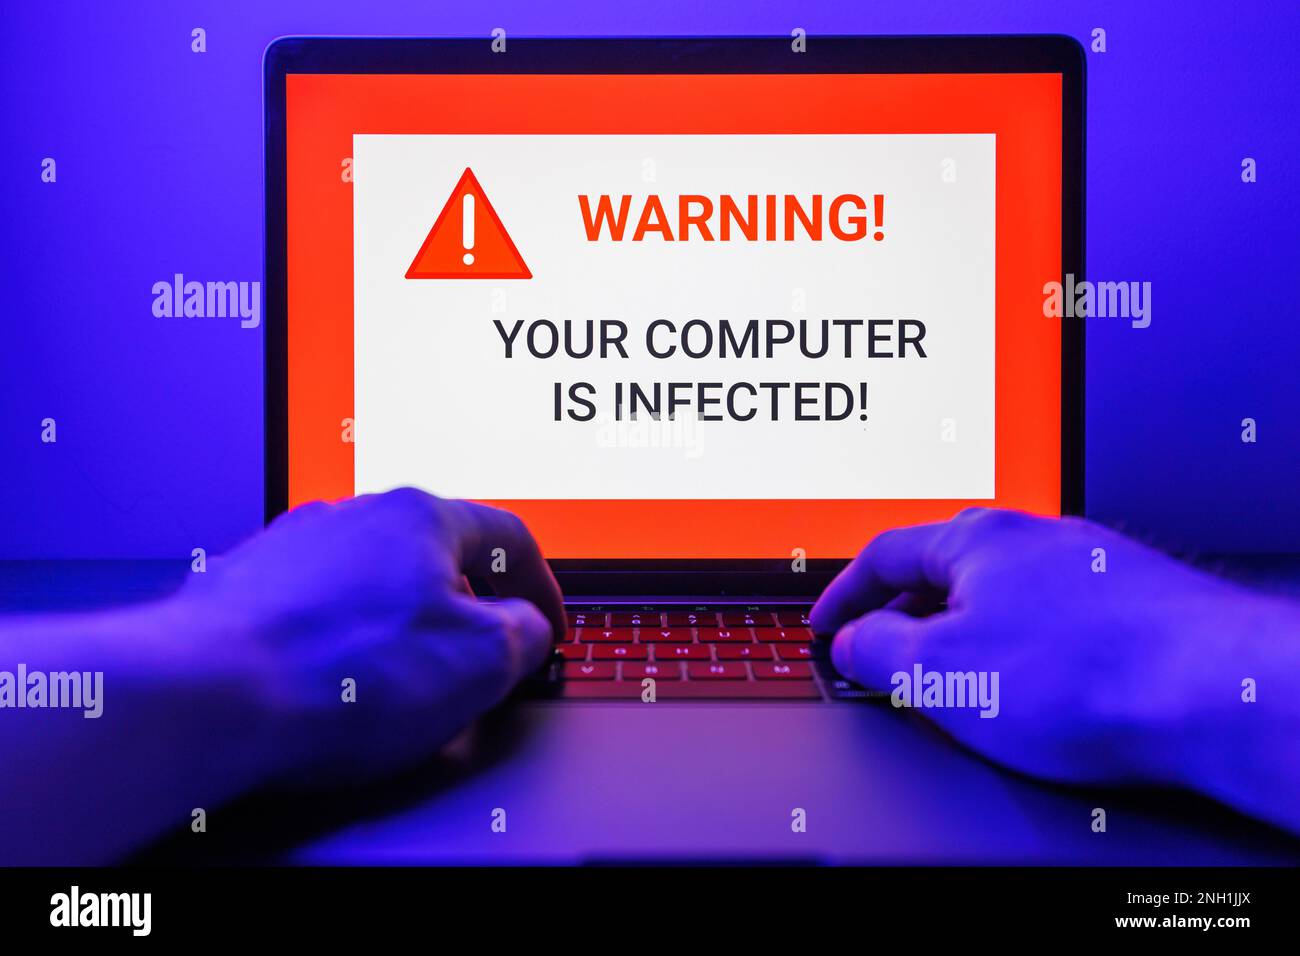 Hacker attack on Computer. Warning text on PC You have been hacked Stock Photo